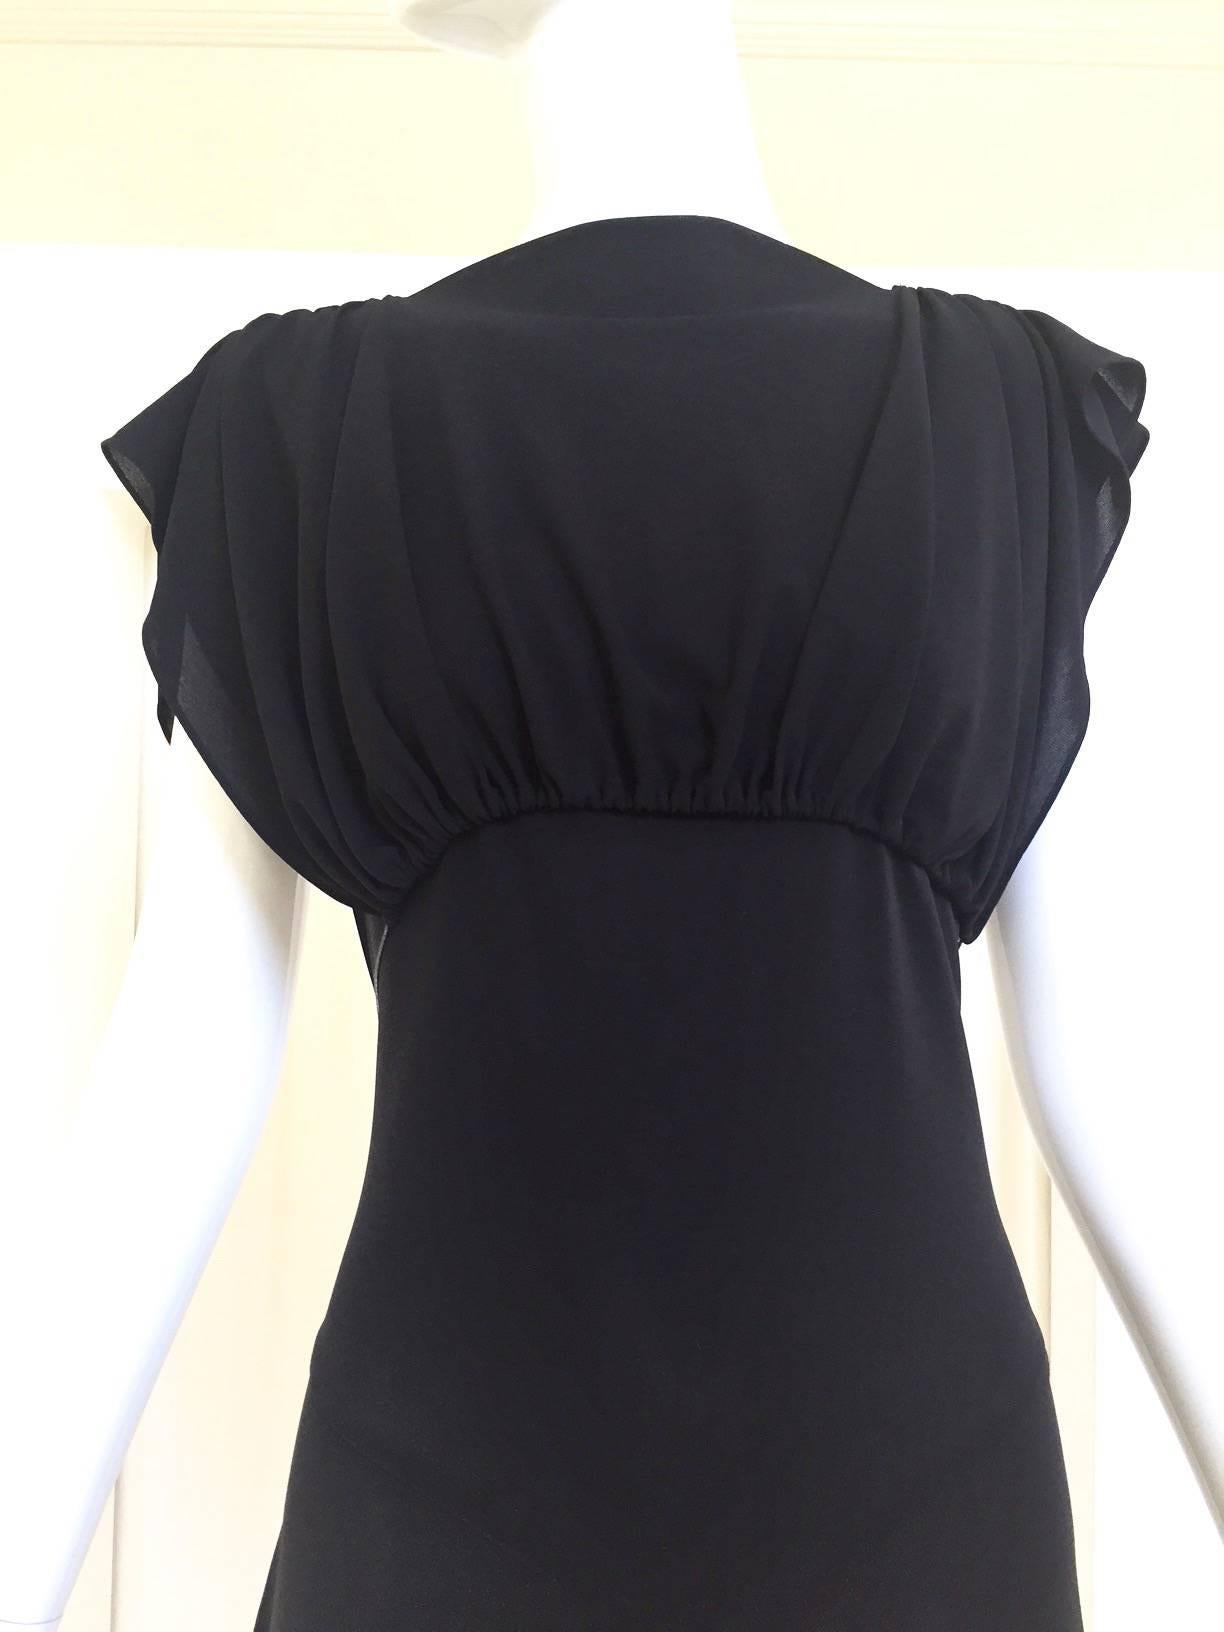 Alaia black rayon dress tie at the back. adjustable waist. lace up with thin leather.
marked size: 42